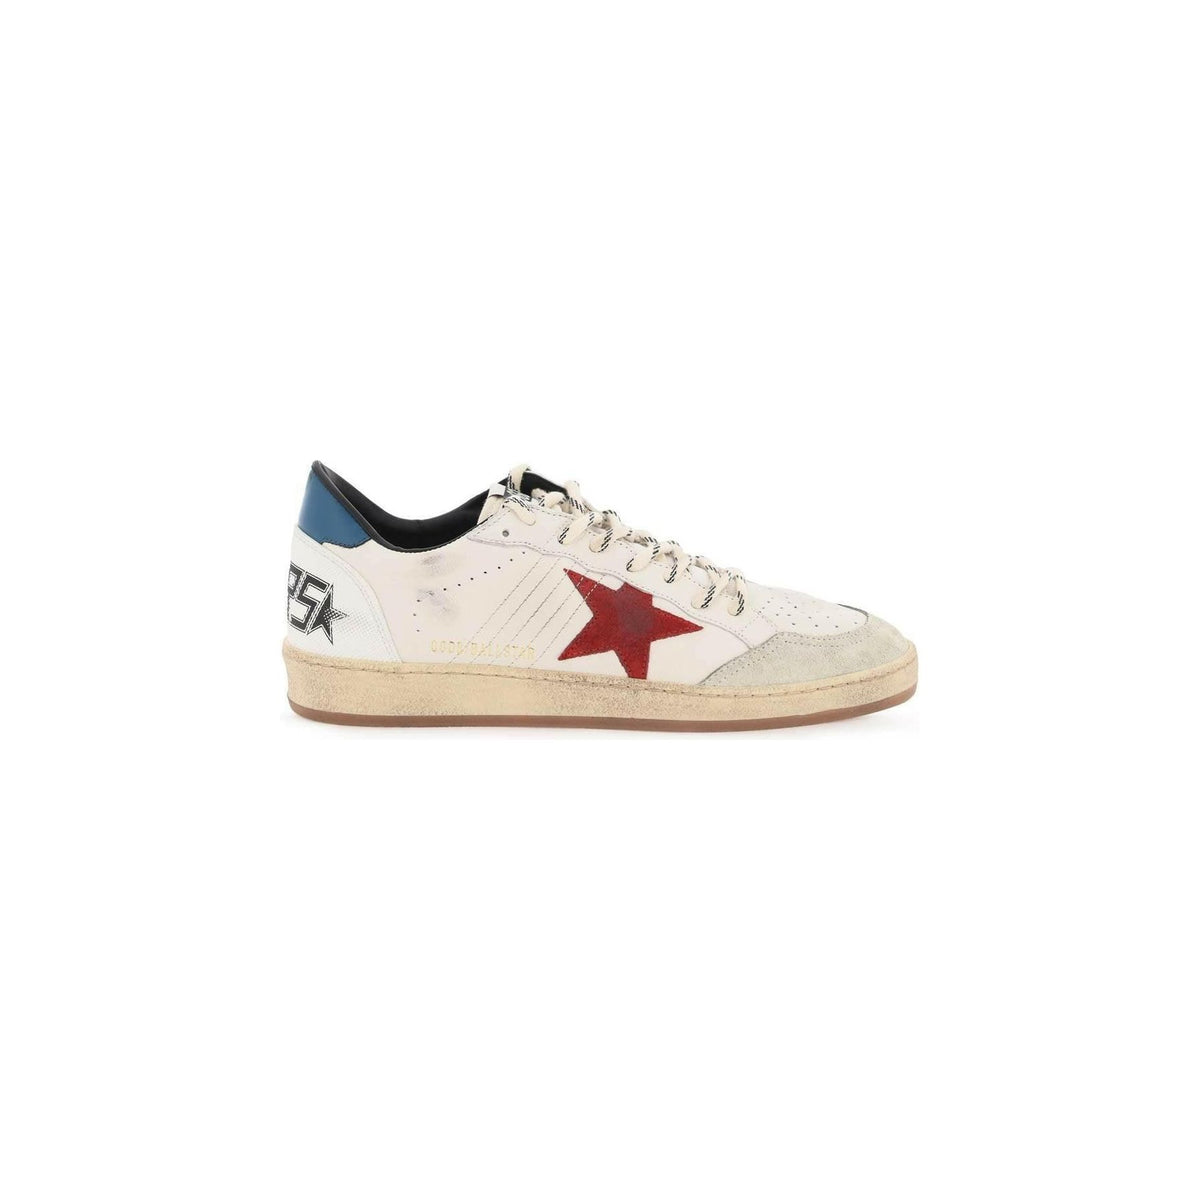 White and Red Ball-Star Leather Low-Top Sneakers GOLDEN GOOSE JOHN JULIA.